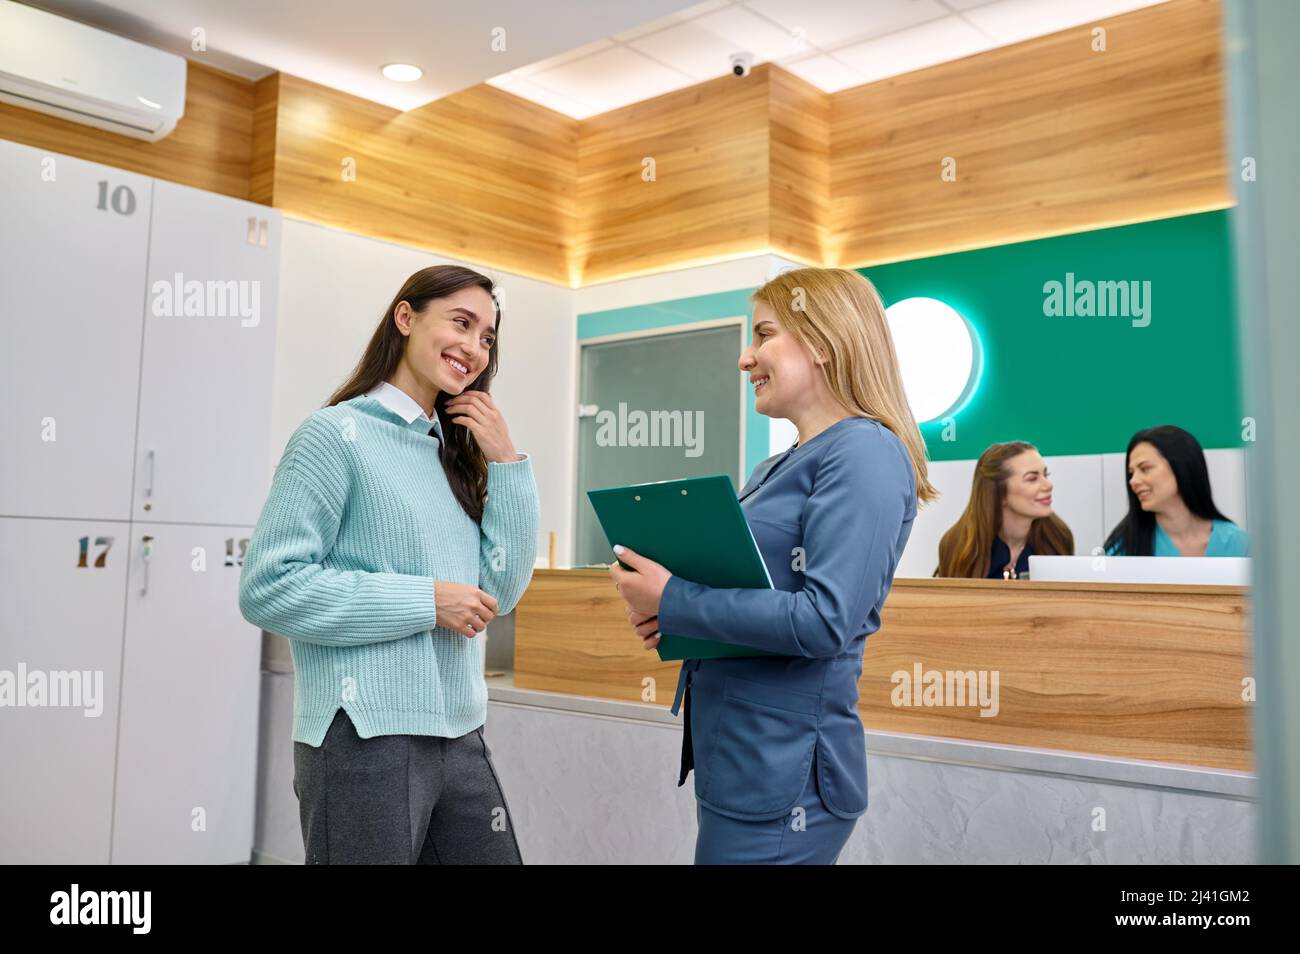 Female doctor and patient discussing medical prescription Stock Photo